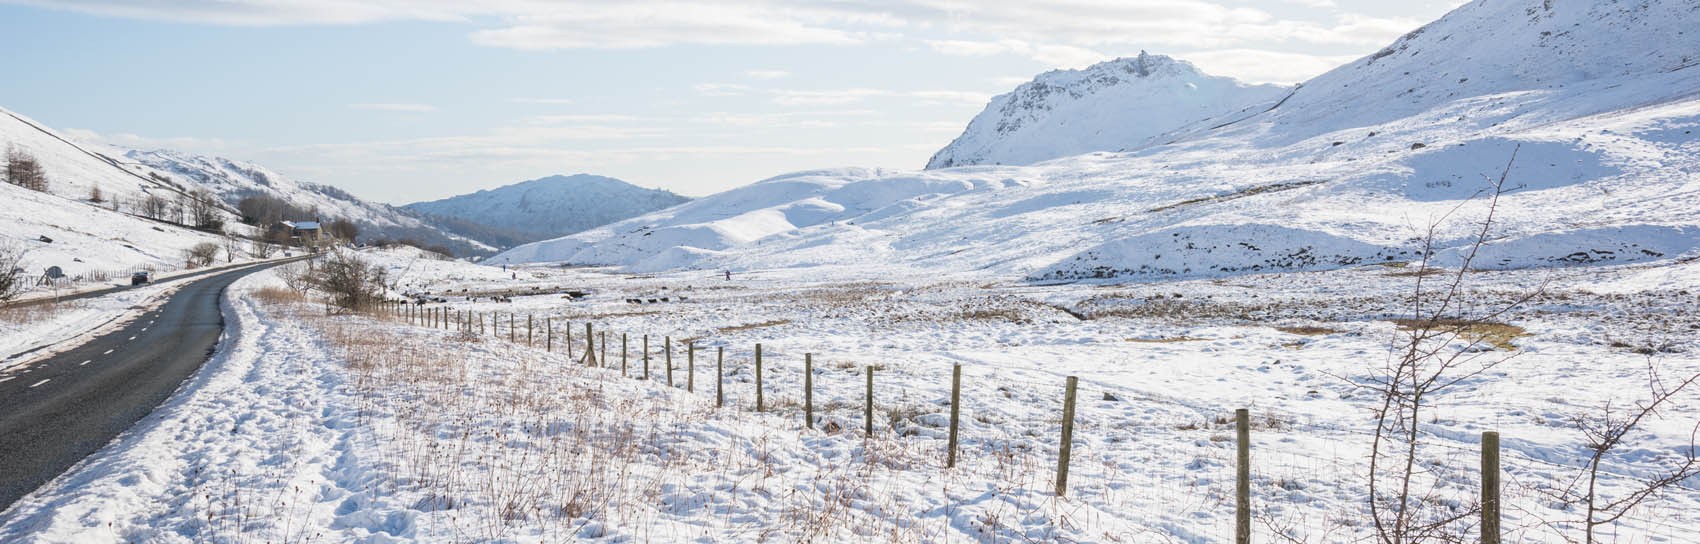 A snowy scene in the Lake District. Photograph by GRAHAM CUSTANCE